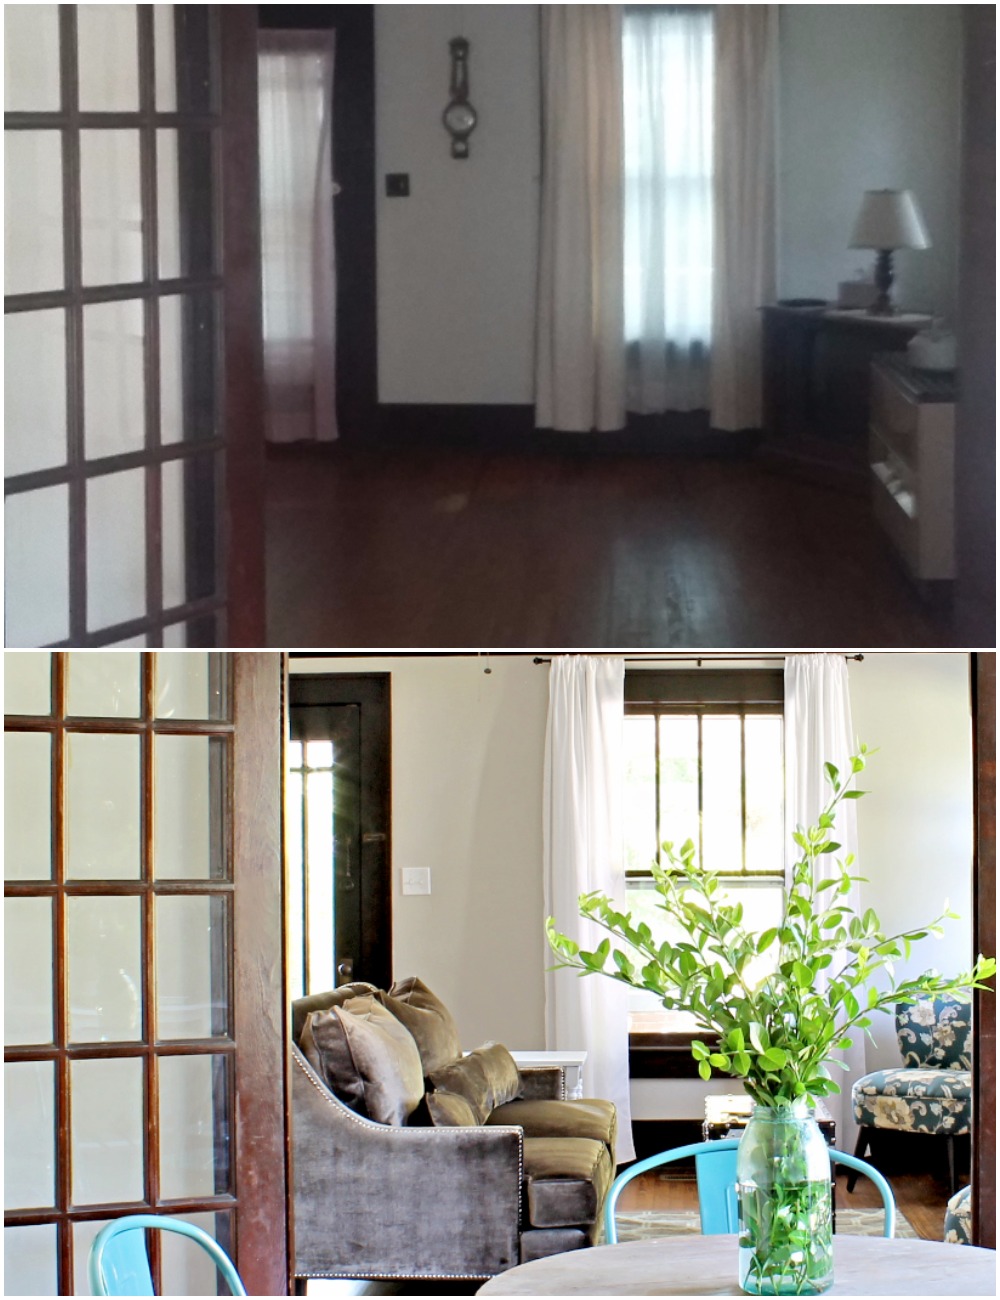 House Flipping Before and Afters - Living Room Budget Renovation Remodel, Wood Trim Paint Colors - Sherwin Williams Repose Gray (3).jpg